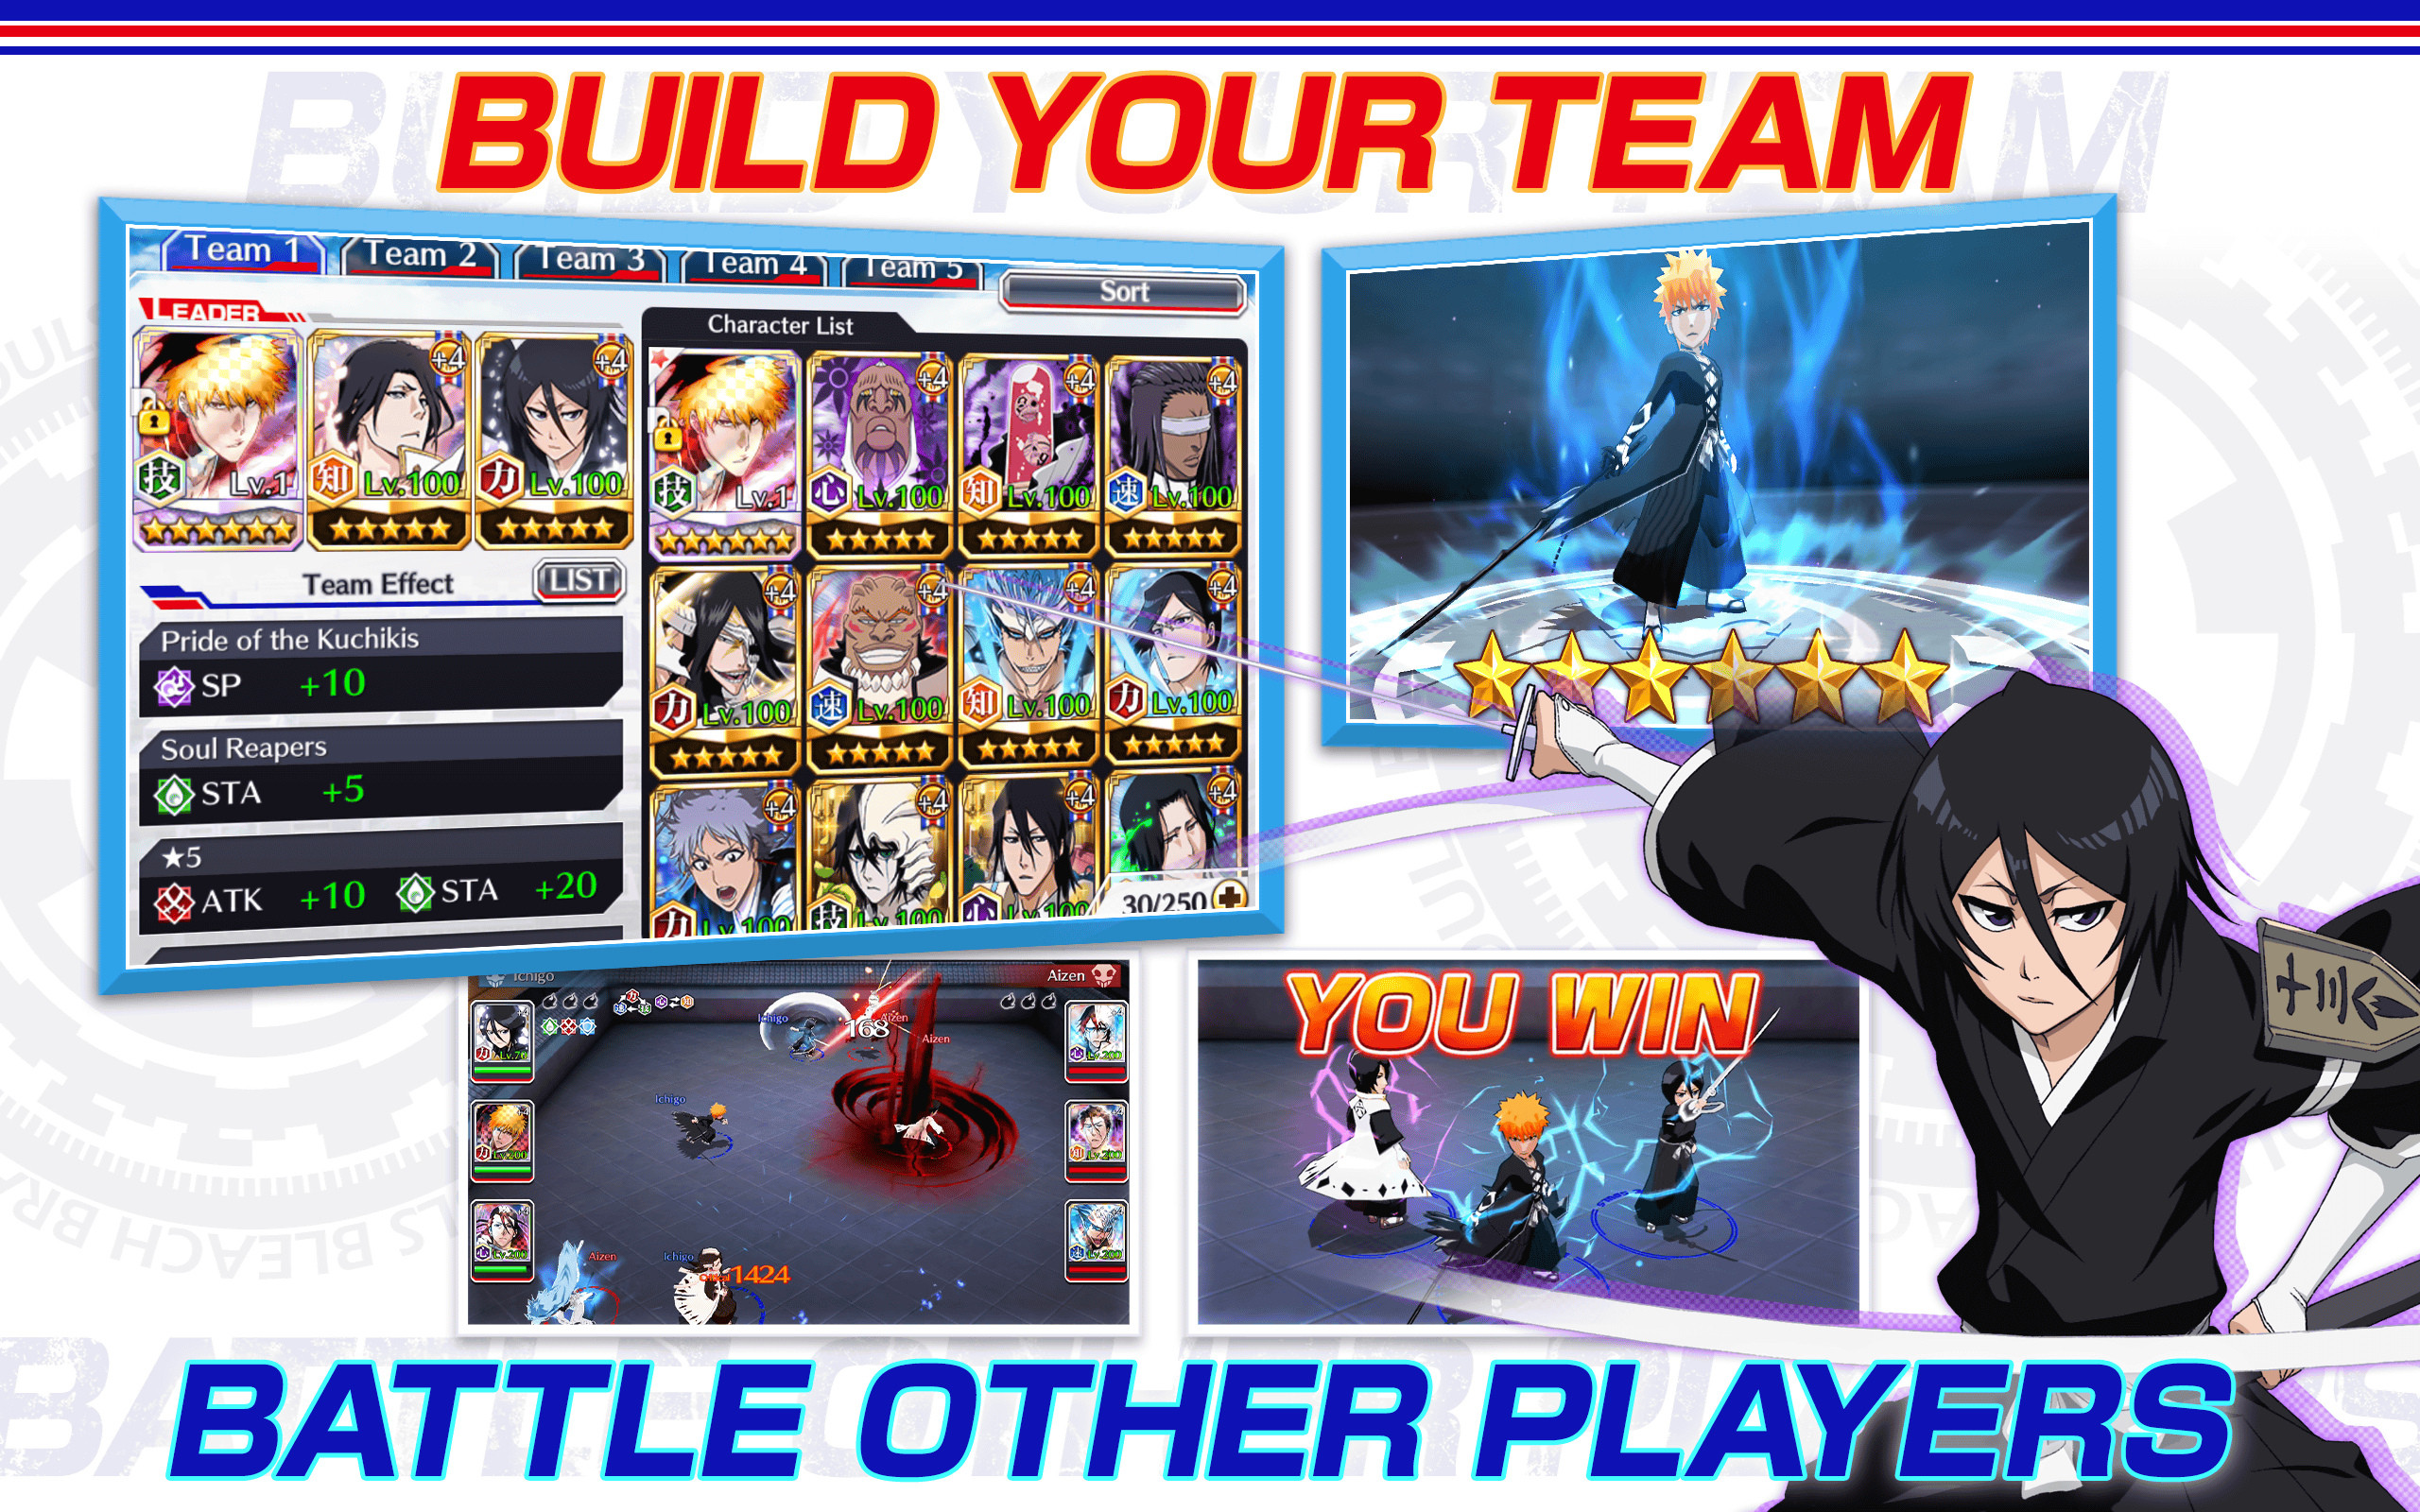 BLEACH Brave Souls APK Download for Android - APKPure - 